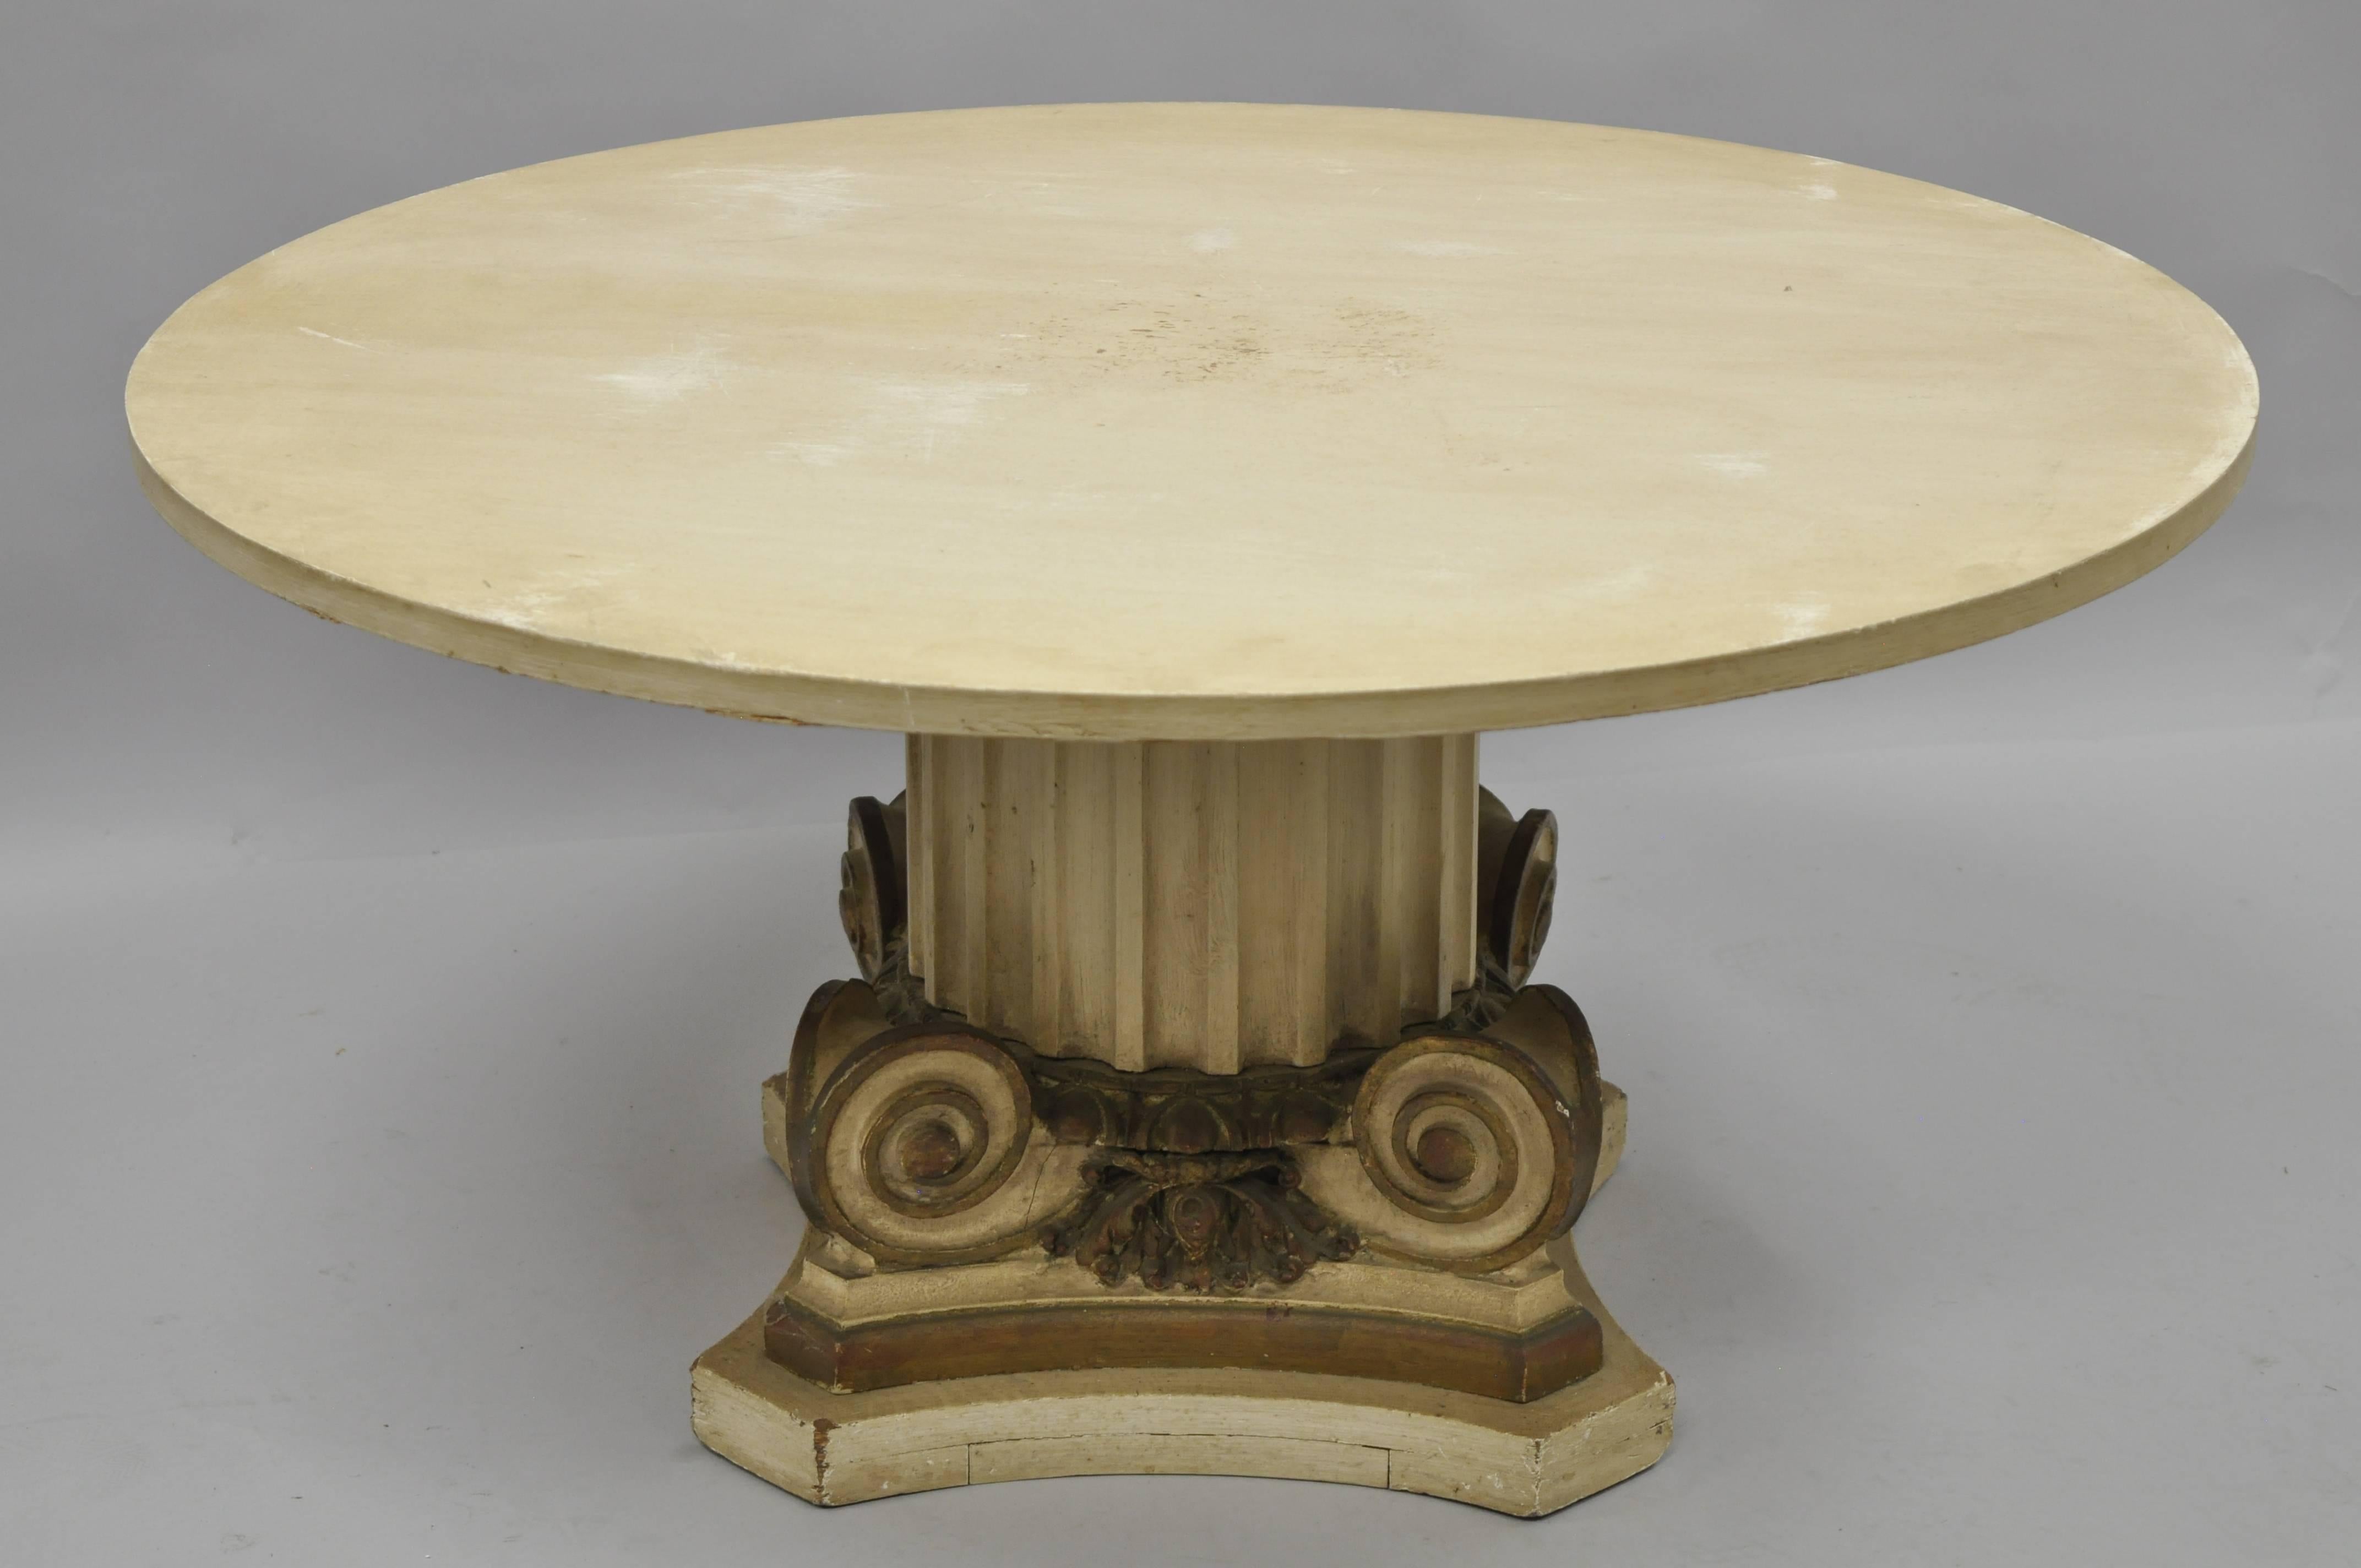 Carved Green Marble Top Fluted Wood Corinthian Column Pedestal Base Round Coffee Table